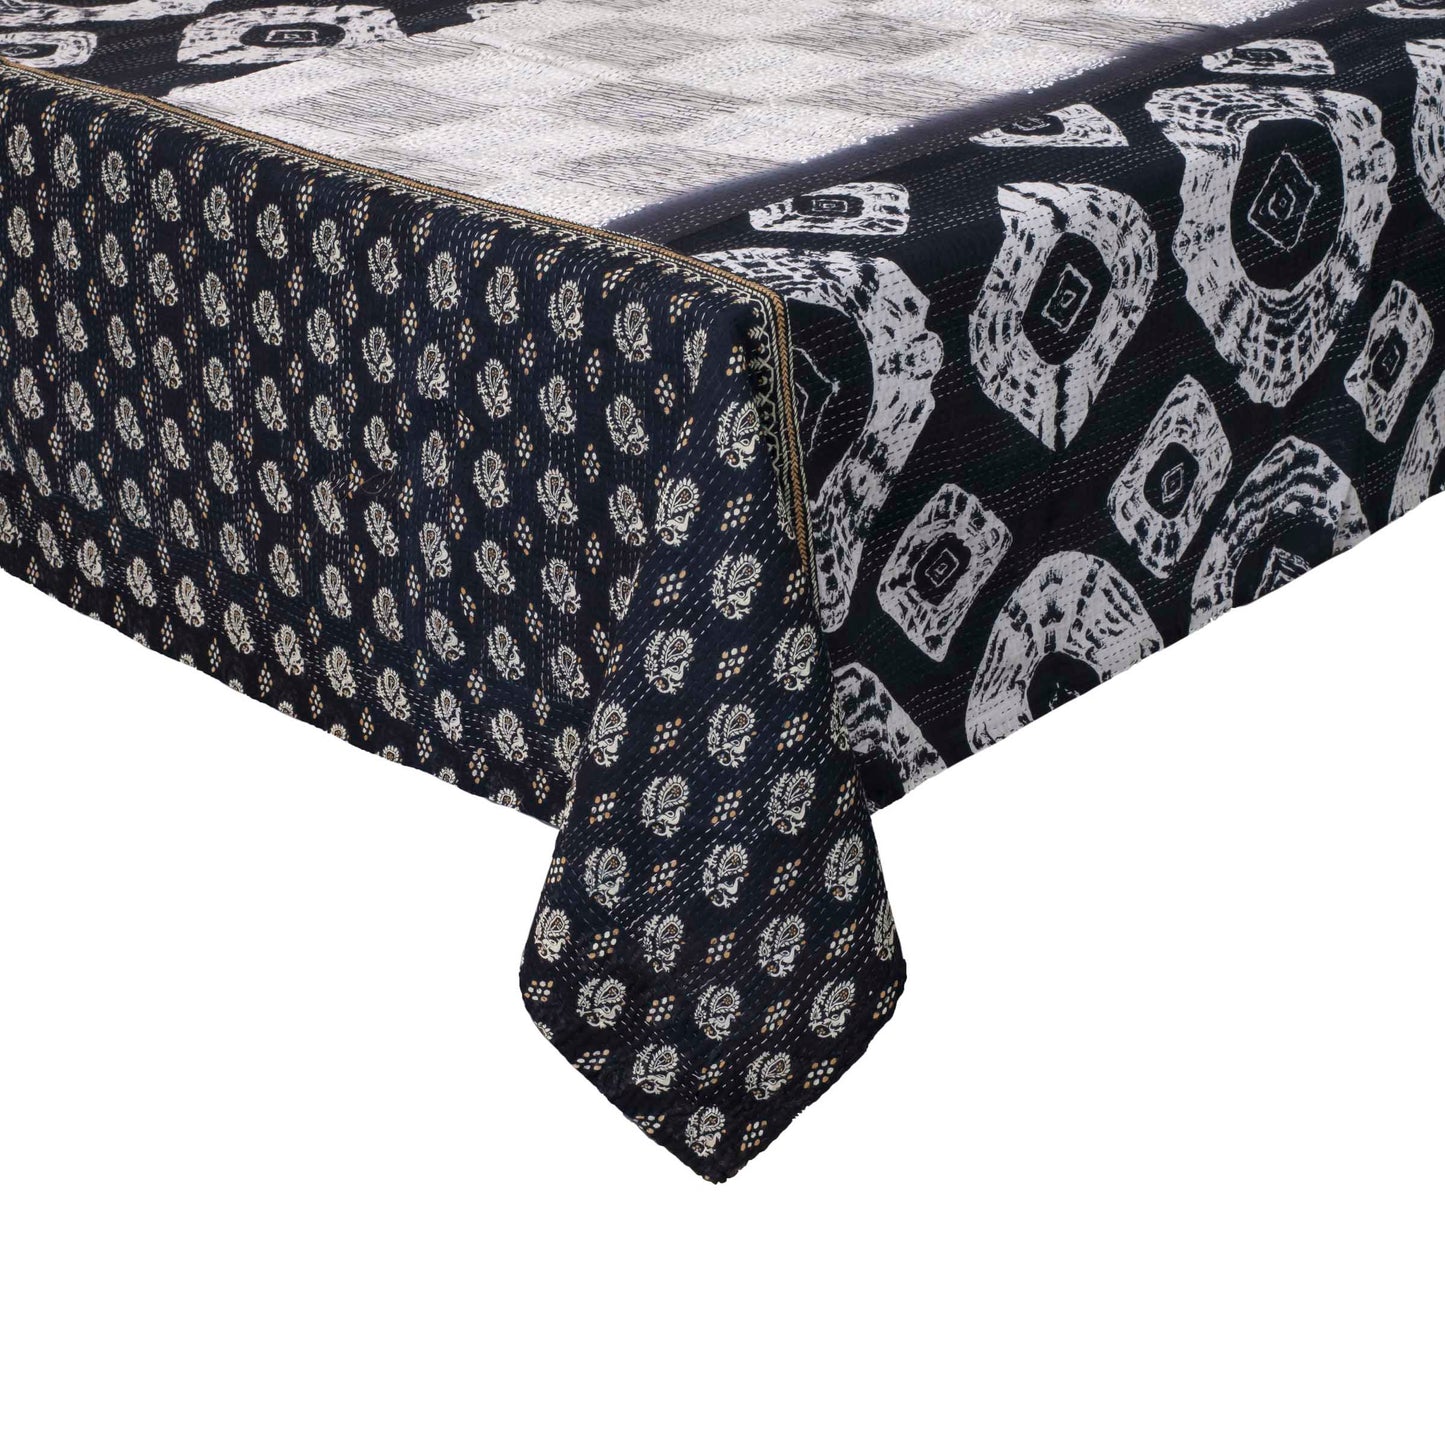 VINTAGE COTTON KANTHA TABLE COVERS - 006